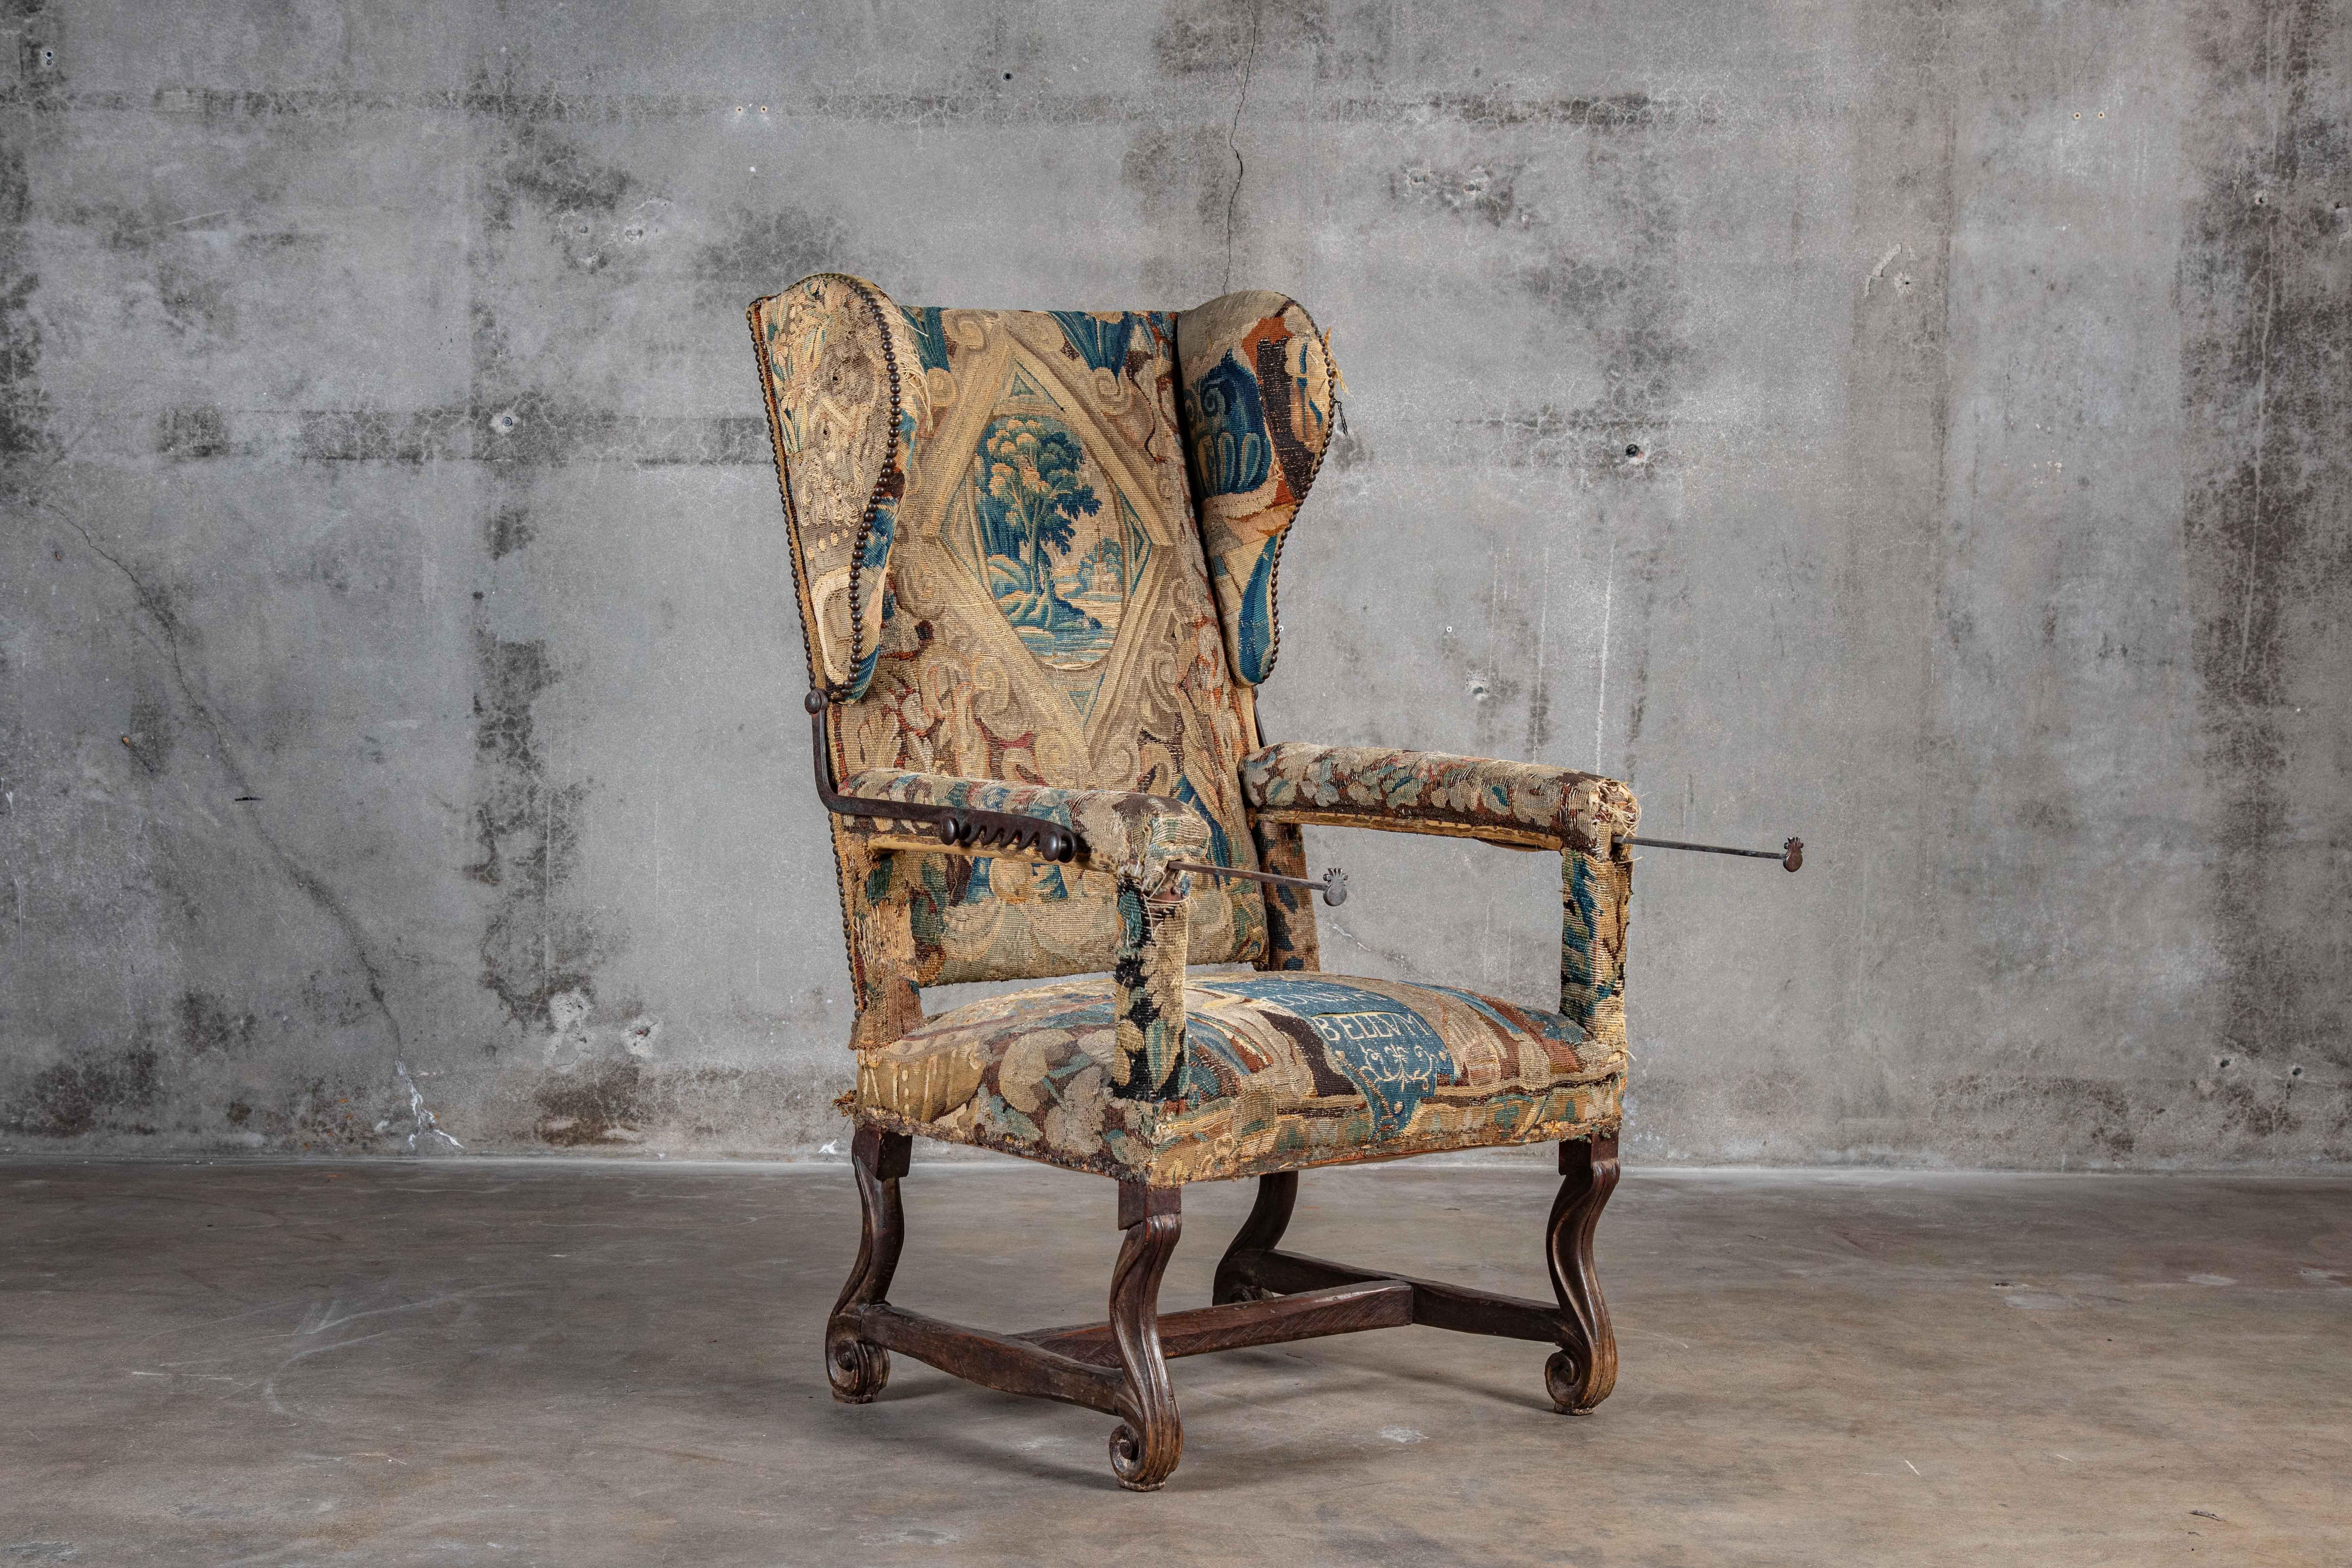 French LXIV adjustable fauteuil in original needlepoint, 18th century.

Measures: Seat: 17